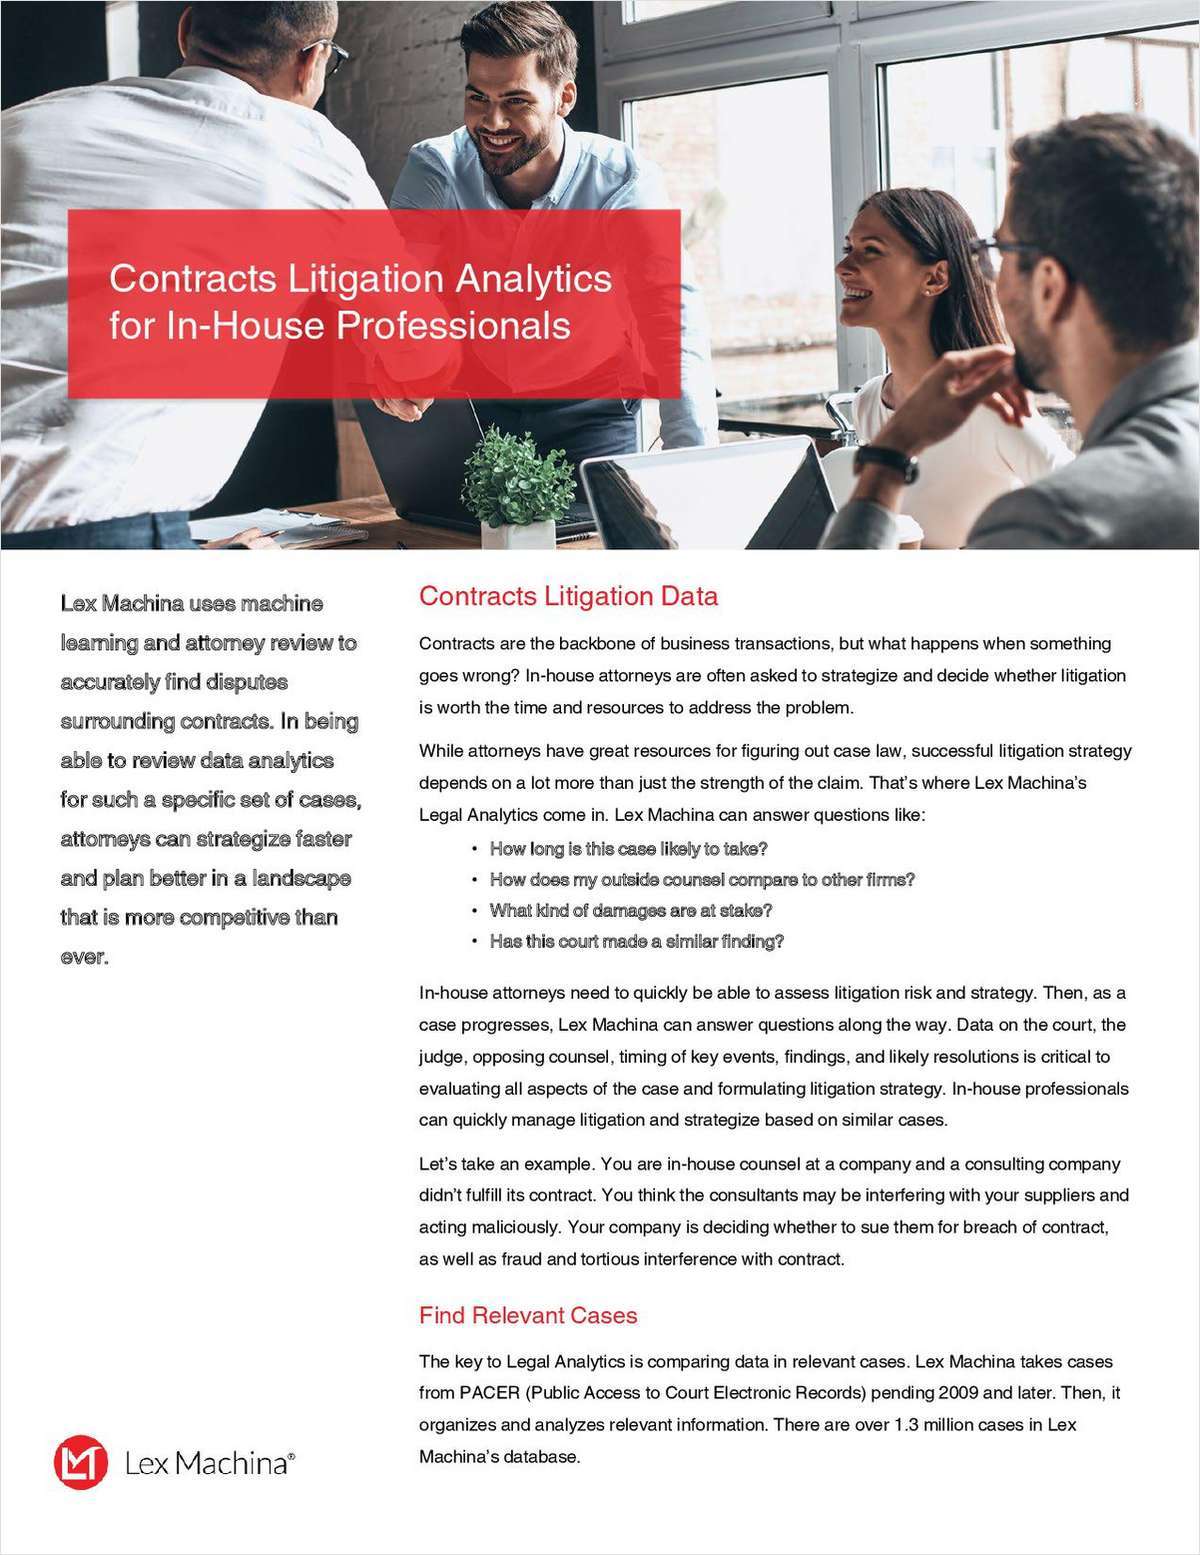 How Contracts Litigation Analytics Helps In-house Professionals Drive Efficiency